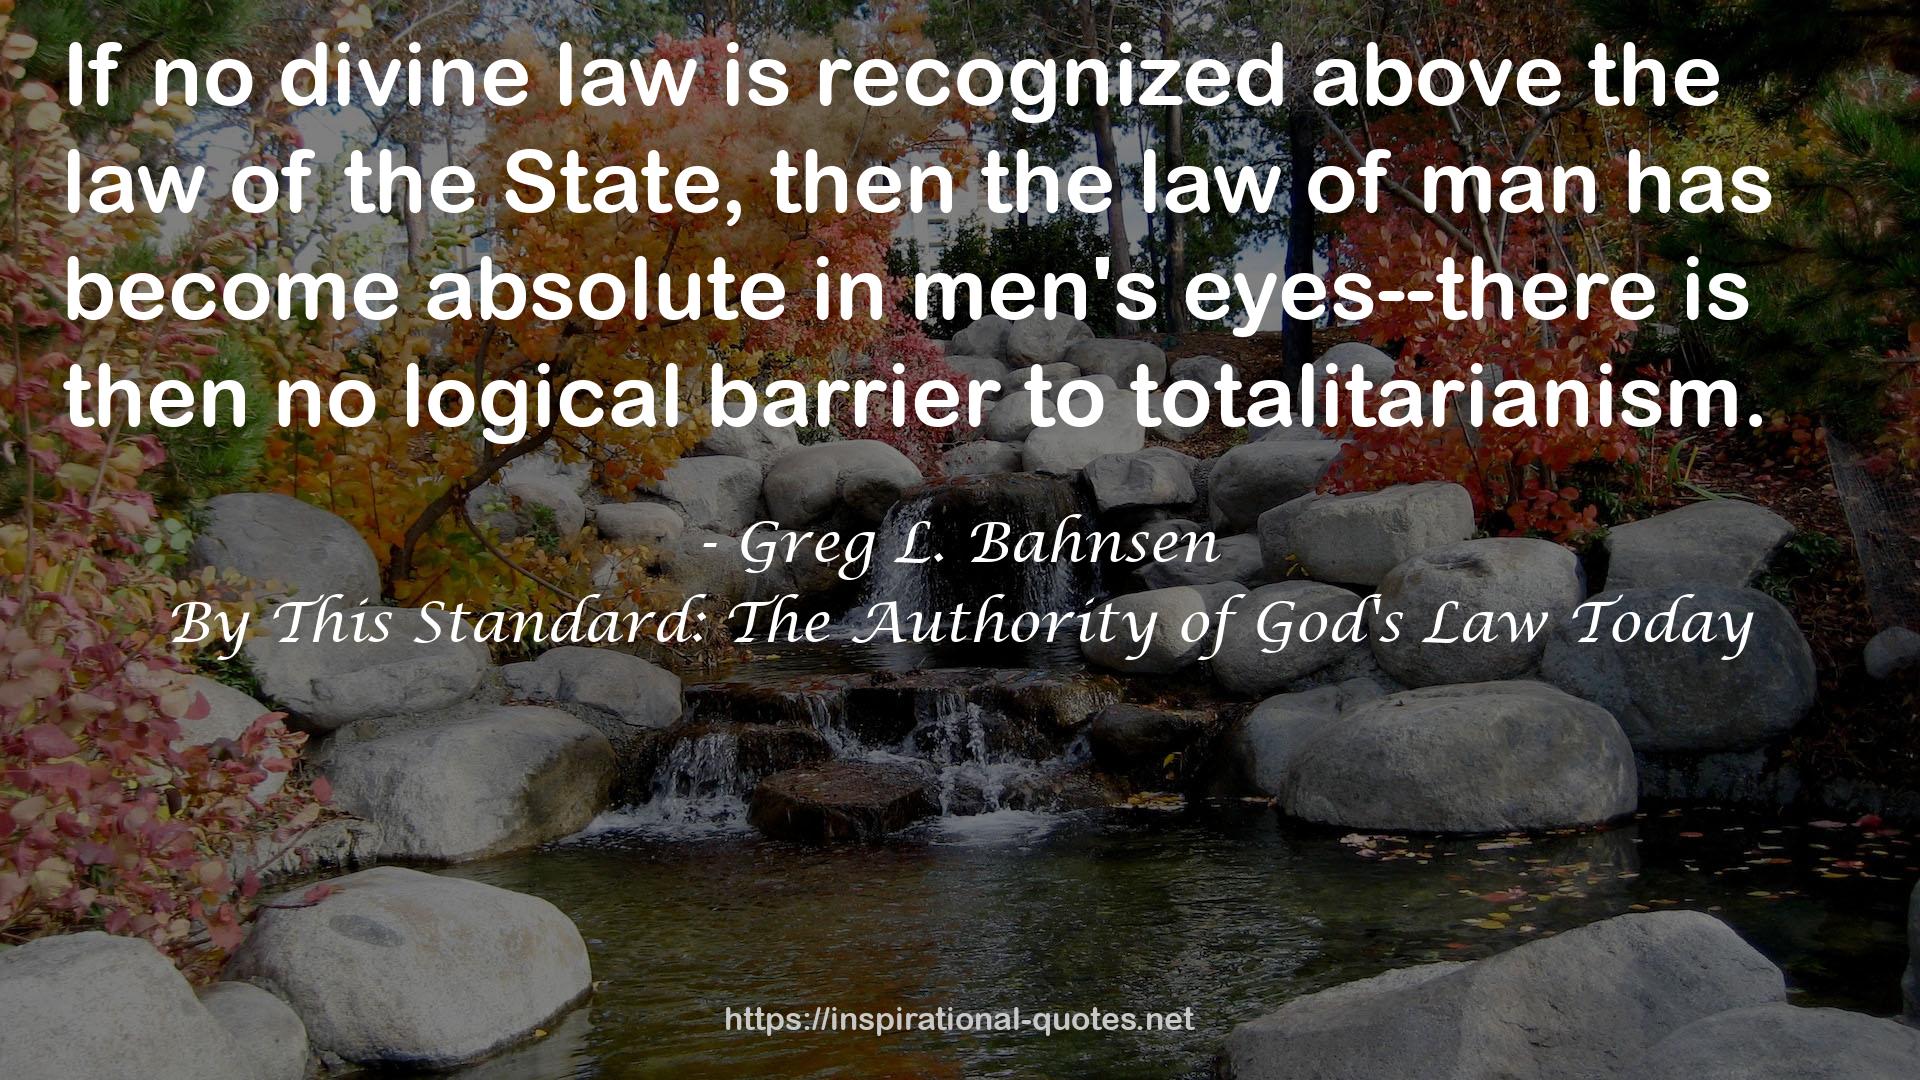 By This Standard: The Authority of God's Law Today QUOTES